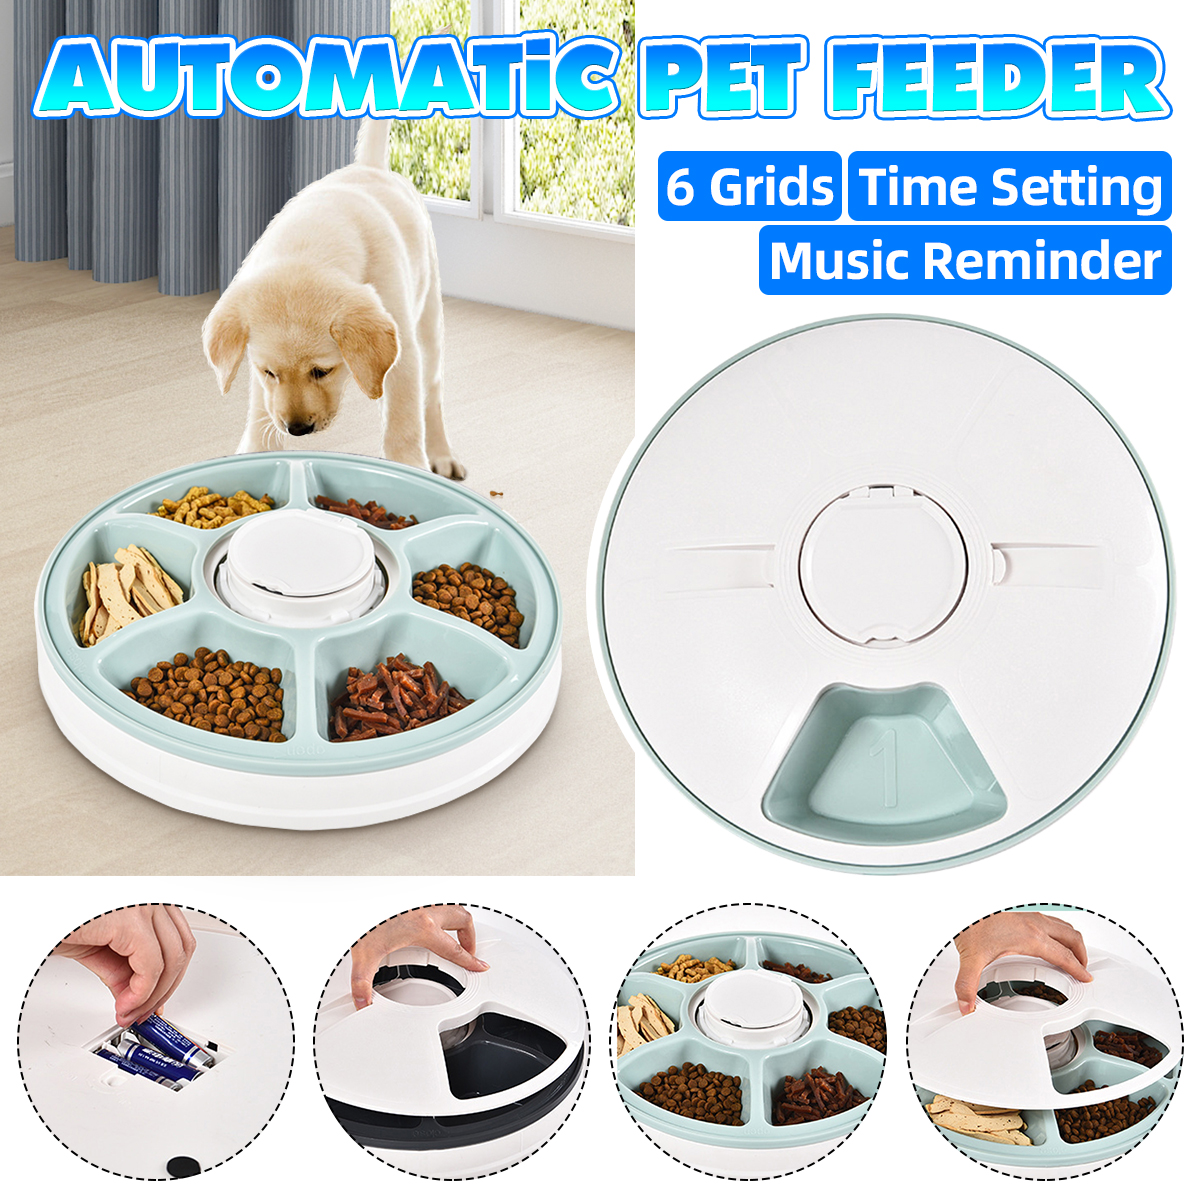 5-Meal-Automatic-Dog-and-Cat-Feeder-Dispenser-for-Dogs-Cats--Small-AnimalsWet--Dry-Food-Universal-Wi-1817273-1